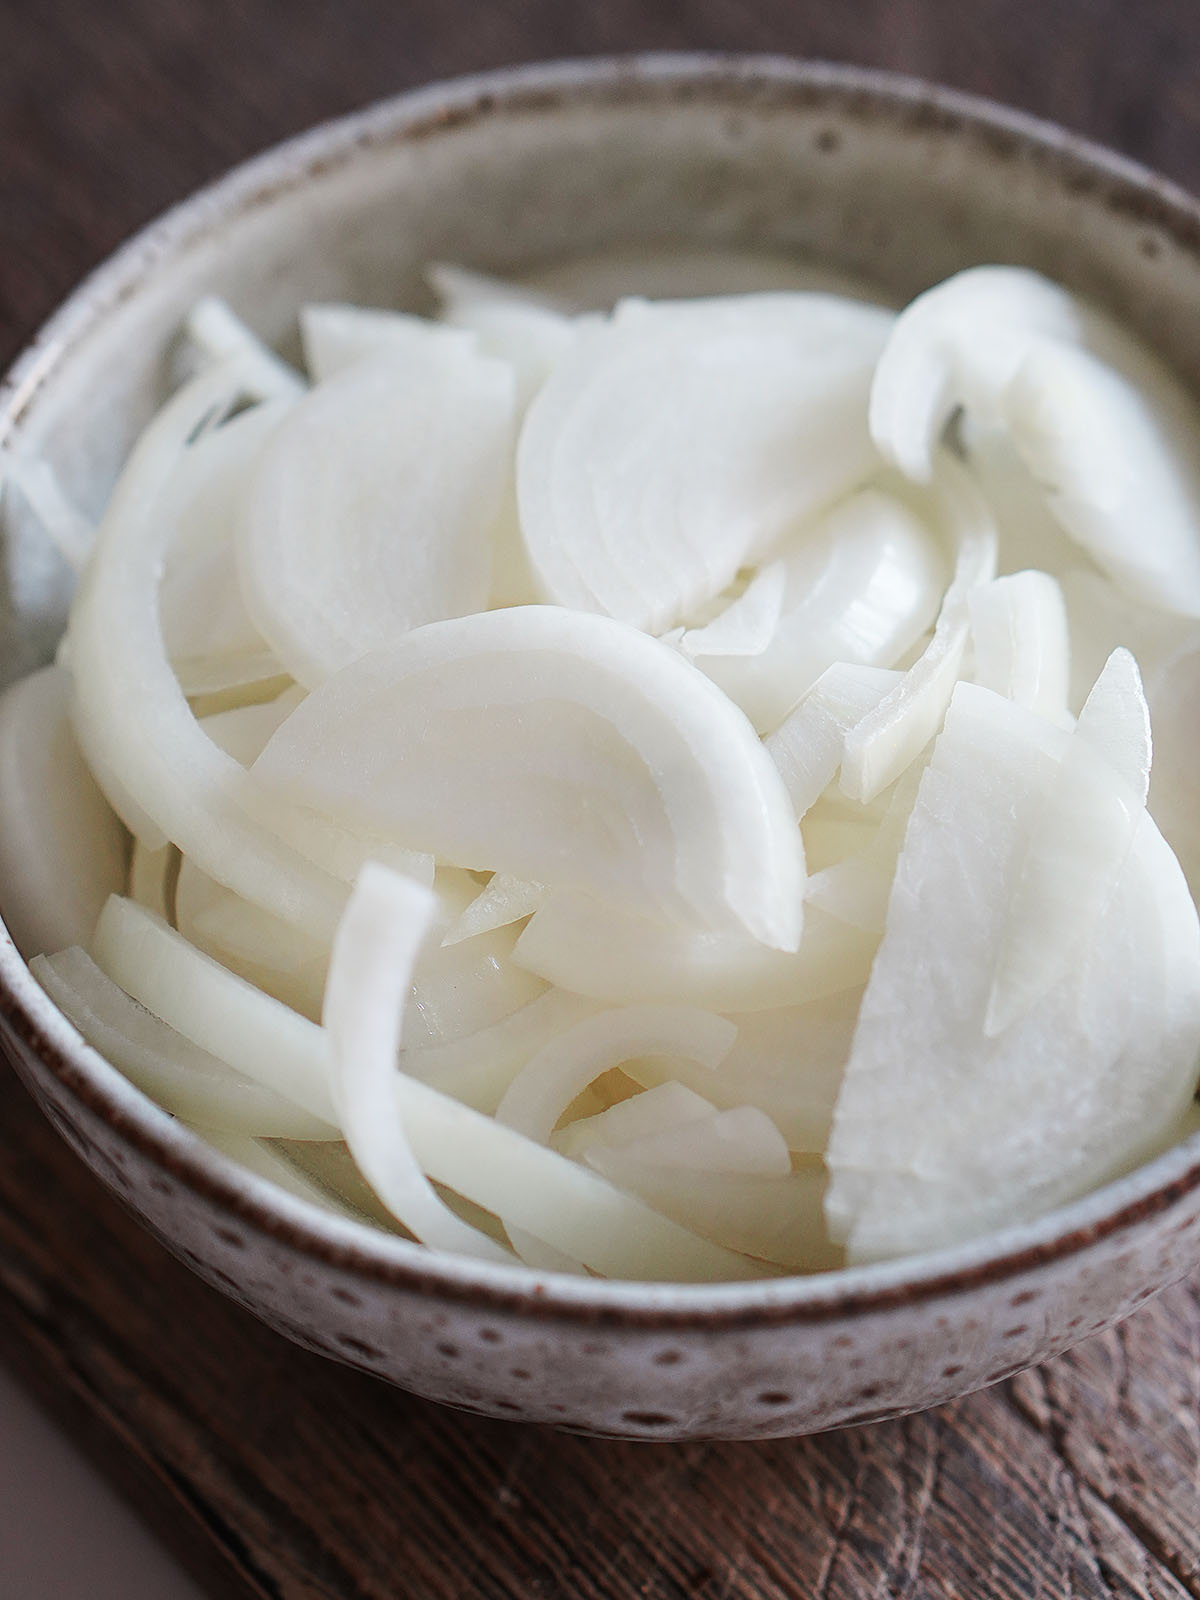 Sliced onions in a bowl.